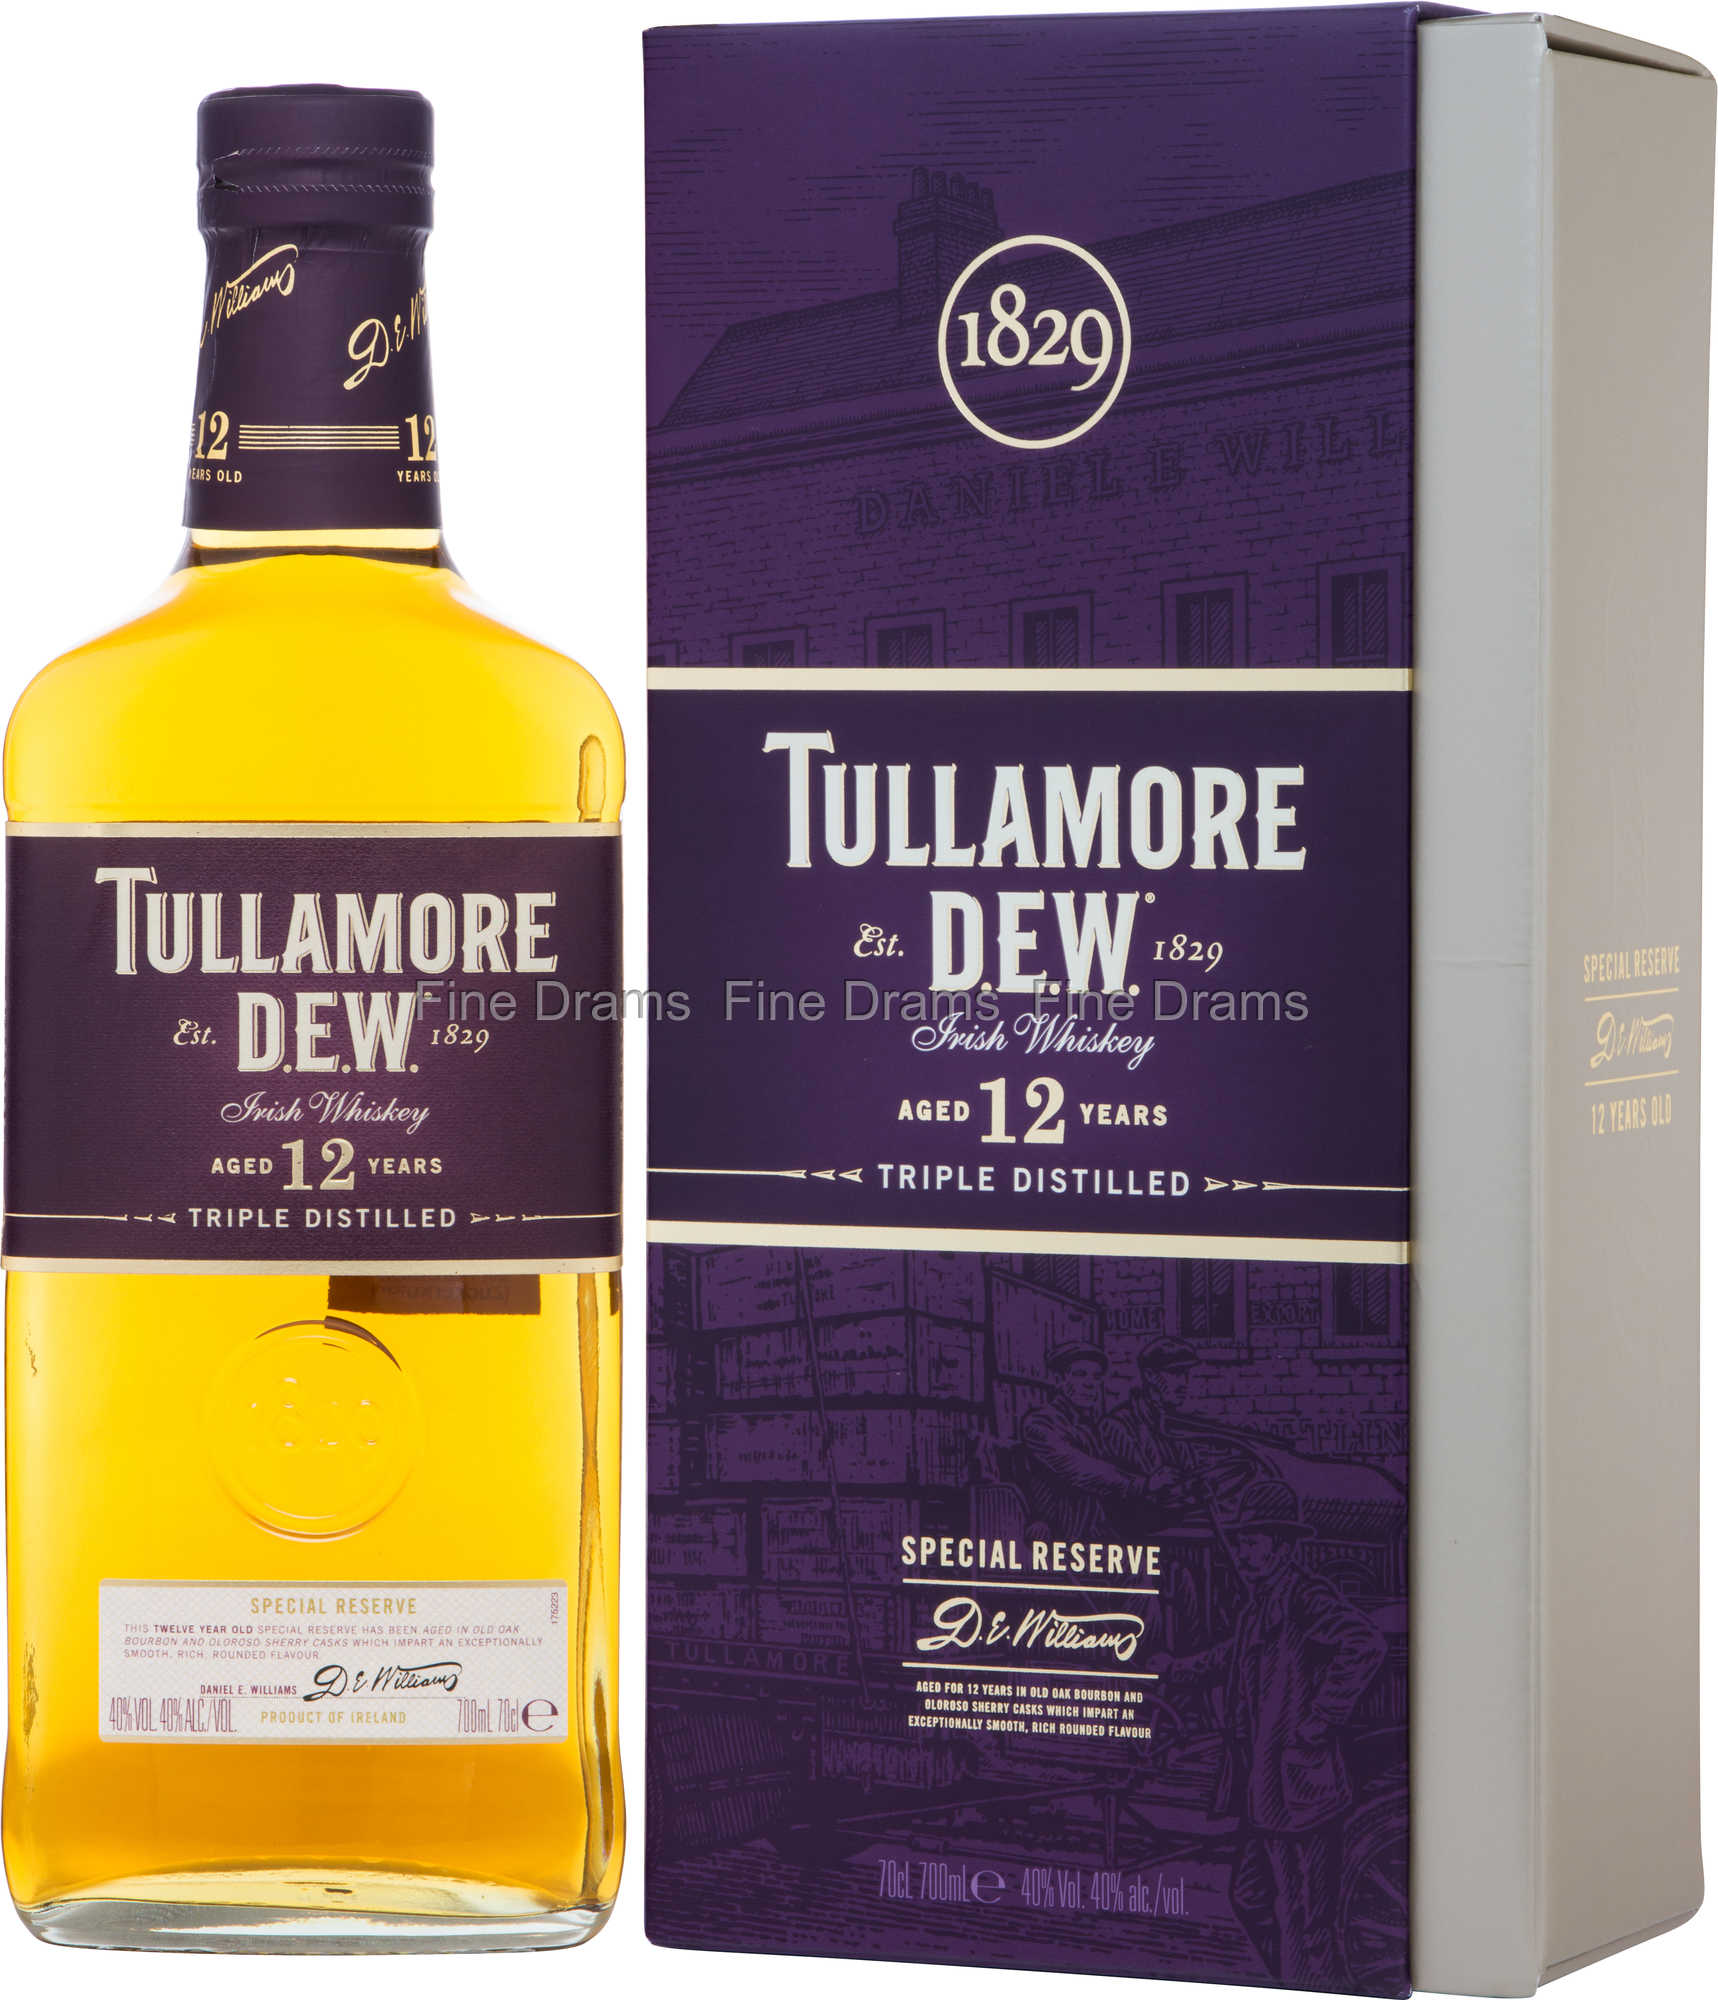 Tullamore D.E.W. 12 Year Old Whisky